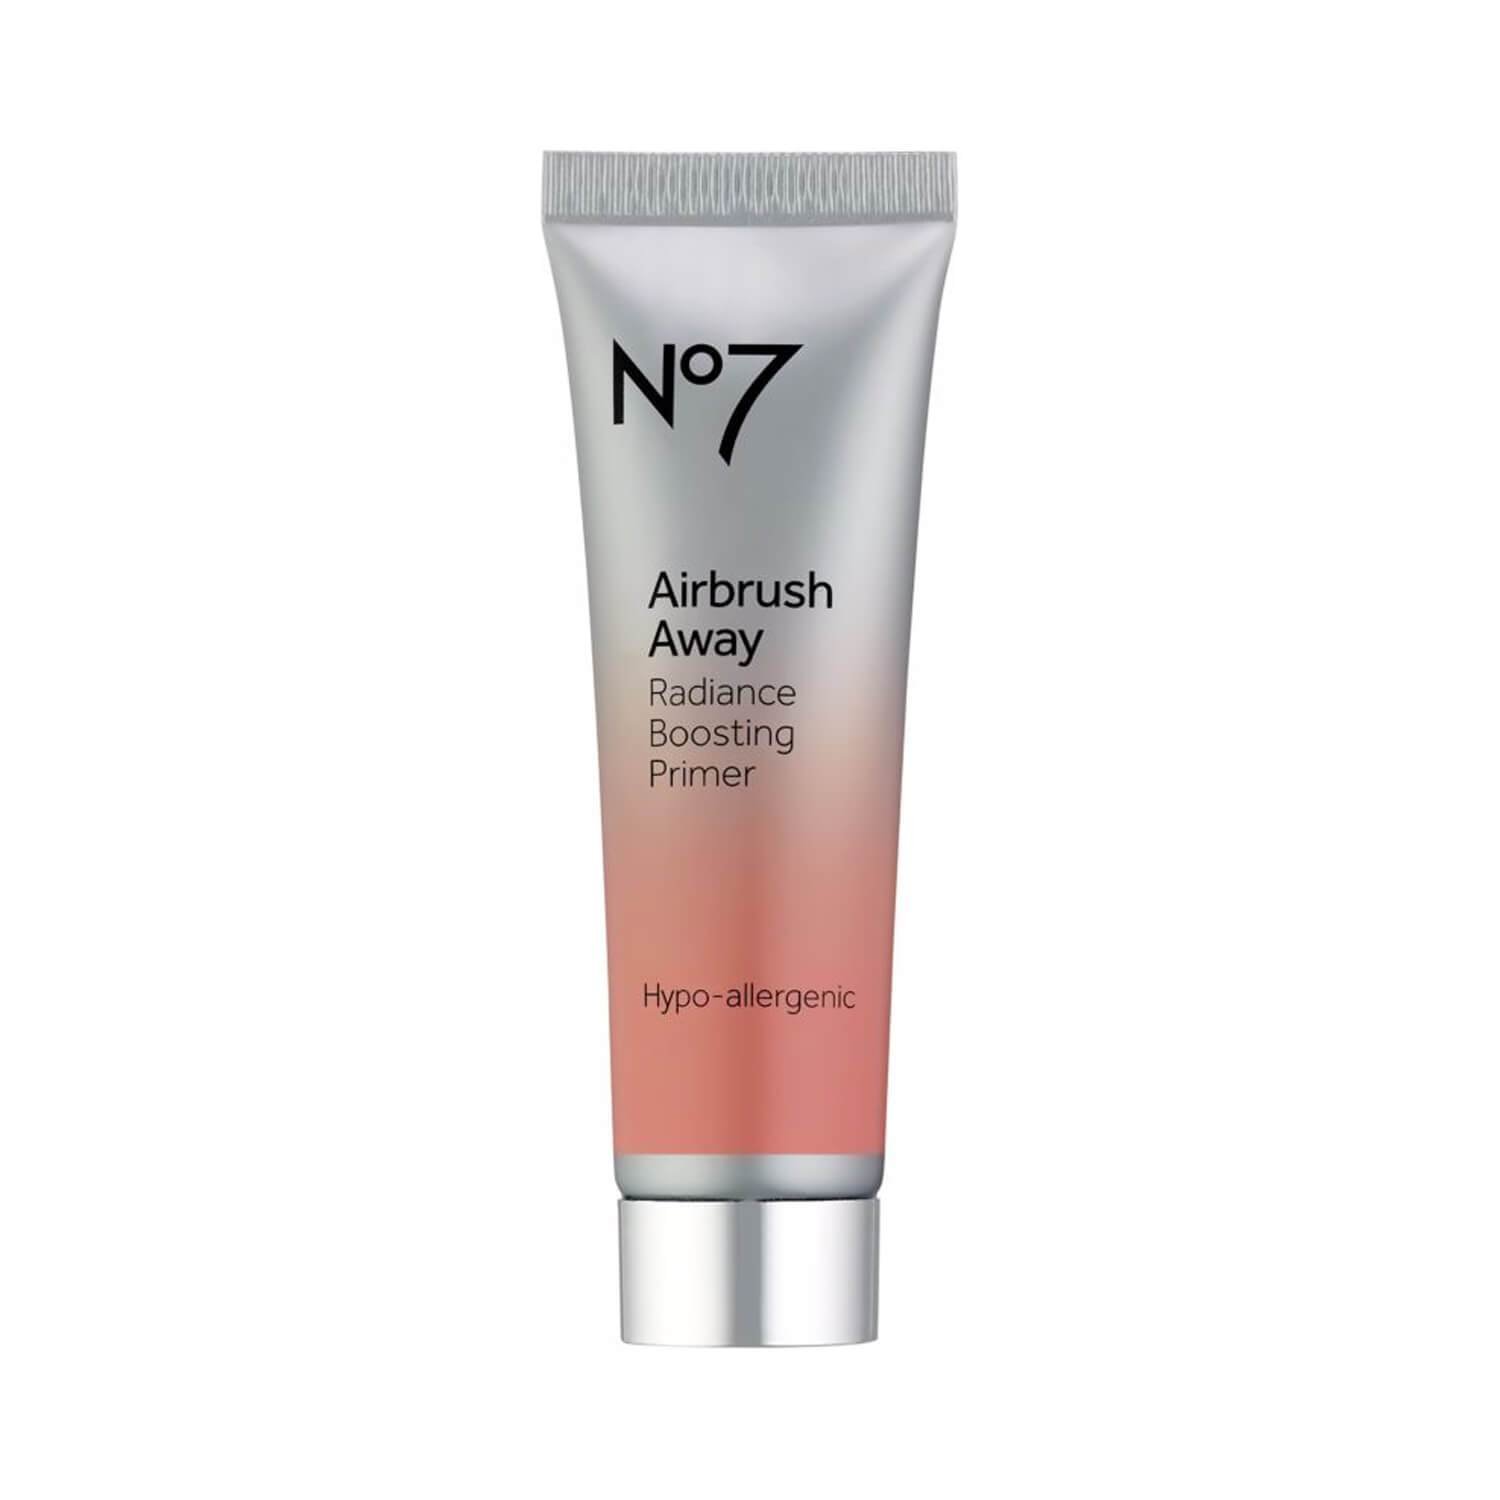  Boots No7 No7 Airbrush Away Radiance Boosting Primer 1 oz